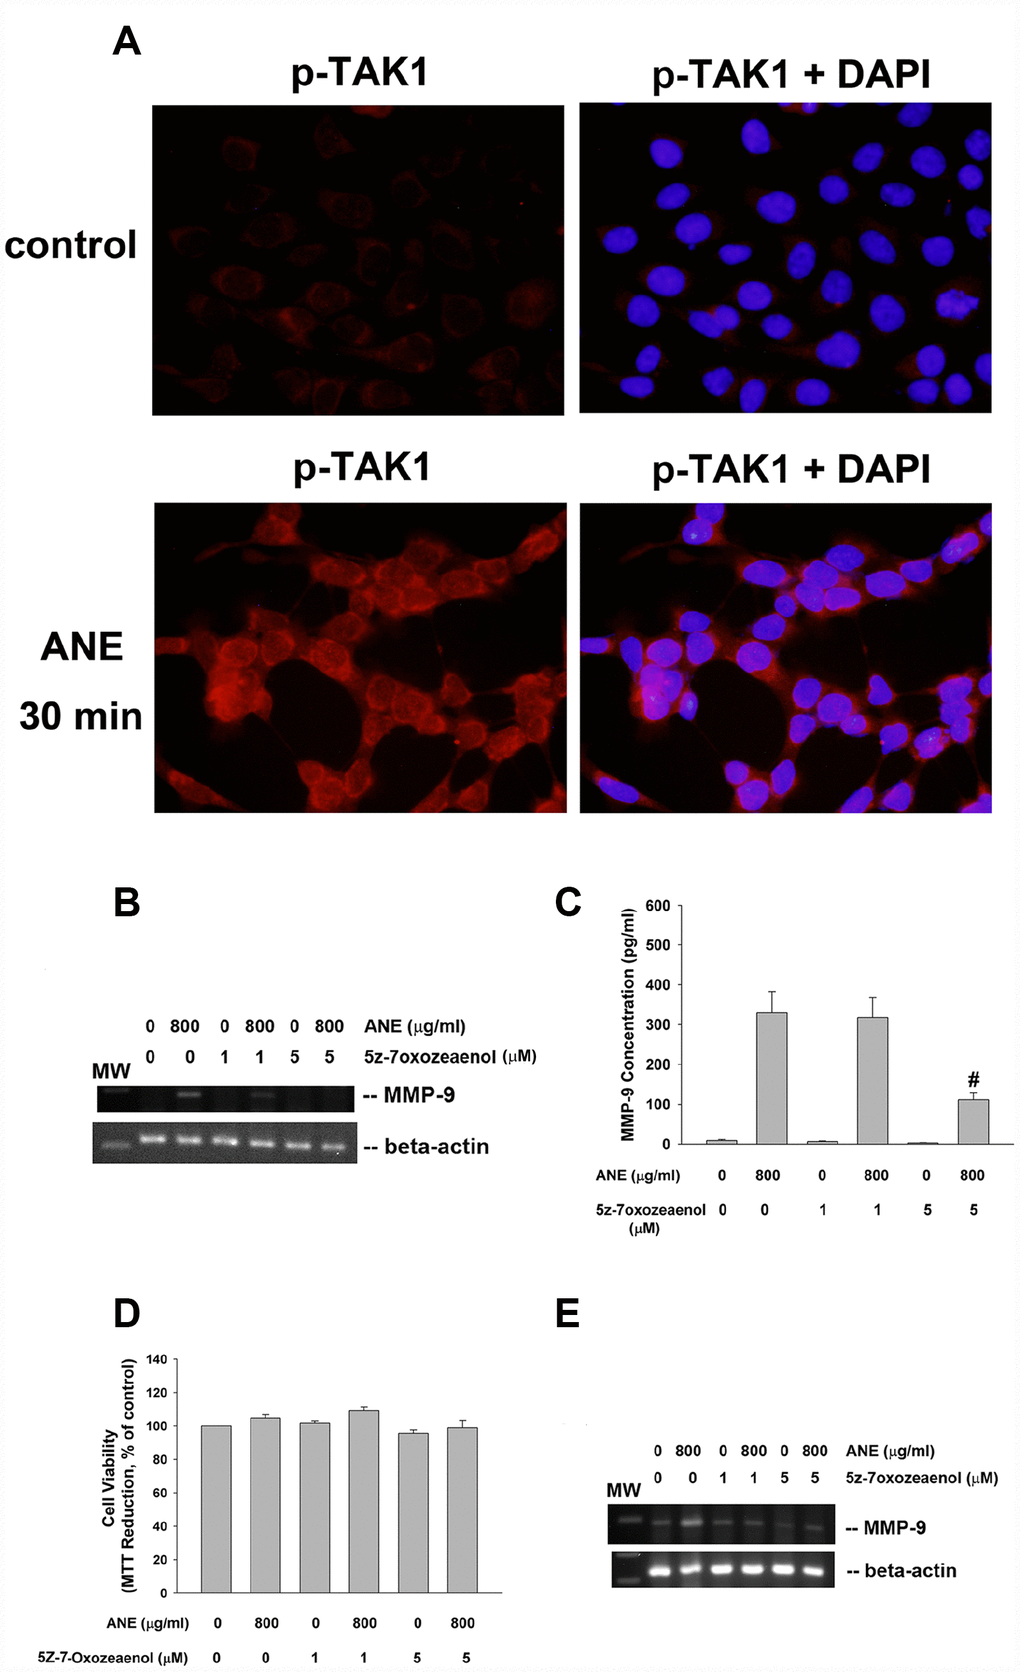 Role of TAK1 activation in ANE-induced MMP-9 expression/secretion. (A) Stimulation of p-TAK1 activation of SAS cells by ANE. (upper) solvent control, and (lower) SAS cells treated by ANE (800 μg/ml) for 30 min. Pictures of p-TAK1 fluorescence (left) & merged with DAPI (right). Effects of 5Z-7-Oxozeaenol (1 and 5 μM) on (B) ANE (800 μg/ml)-induced MMP-9 mRNA expression of SAS cells as analyzed by semi-quantitative RT-PCR. One representative result was shown, and (C) ANE (800 μg/ml)-induced MMP-9 secretion in SAS cells as analyzed by ELISA. (D) Effect of ANE with/without 5Z-7-Oxozeaenol on the viability of SAS cells (as % of control, 100%), (E) ANE-induced MMP-9 mRNA expression of GK as analyzed by semi-quantitative RT-PCR.